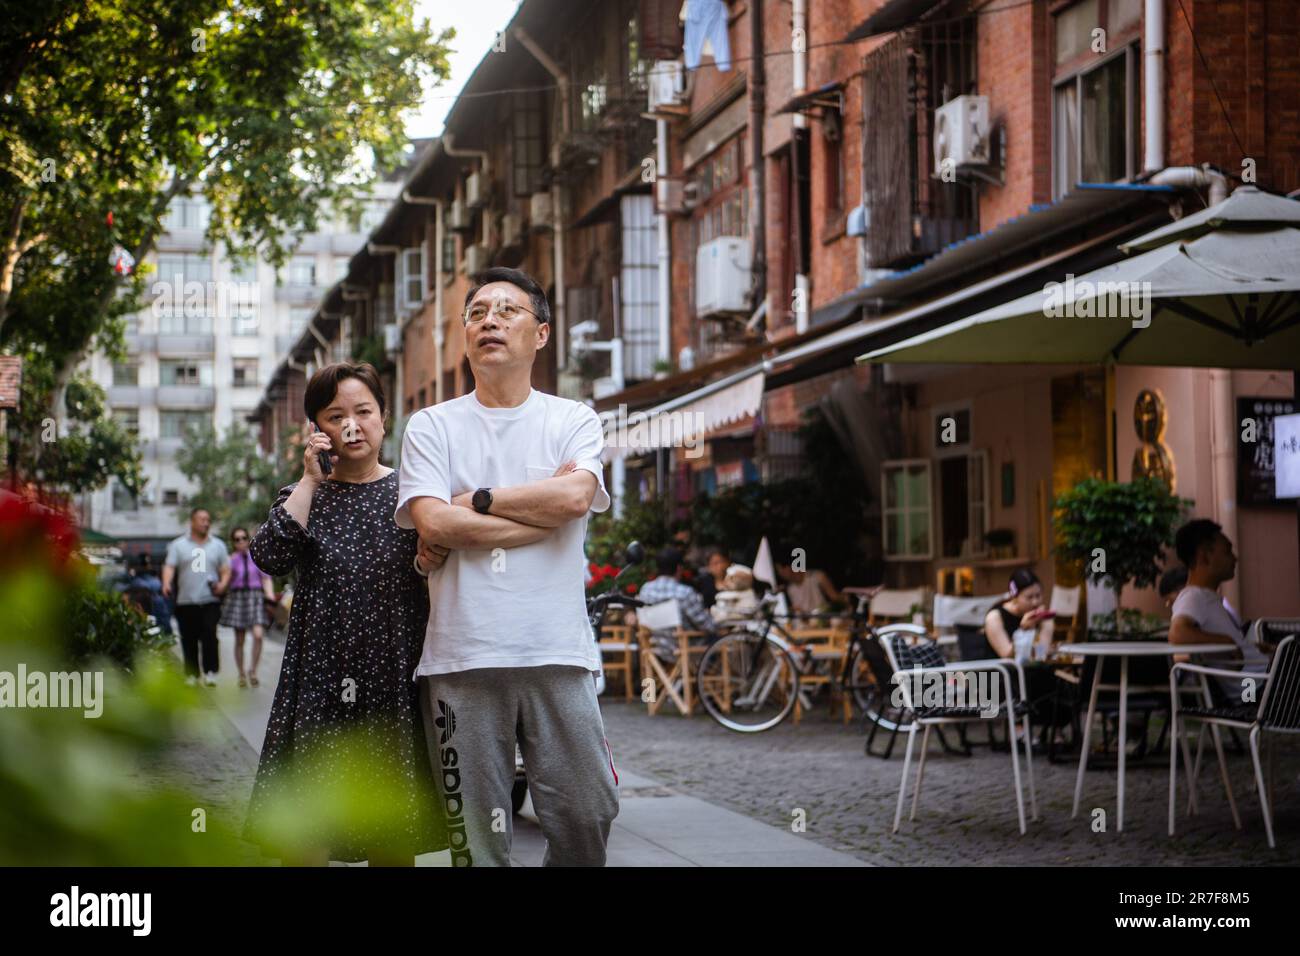 (230615) -- WUHAN, June 15, 2023 (Xinhua) -- Tourists visit Lihuangpi Street of Hankou historical area in Wuhan, central China's Hubei Province, June 6, 2023. Covering an area of 6.02 square kilometers, the Hankou historical area in the heart of Wuhan City's old town, boasts an abundance of historical and cultural heritages.    In recent years, Wuhan City has undertaken many urban renewal projects to revitalize this area's aging buildings. The historical area has seen significant changes through those efforts. (Xinhua/Wu Zhizun) Stock Photo